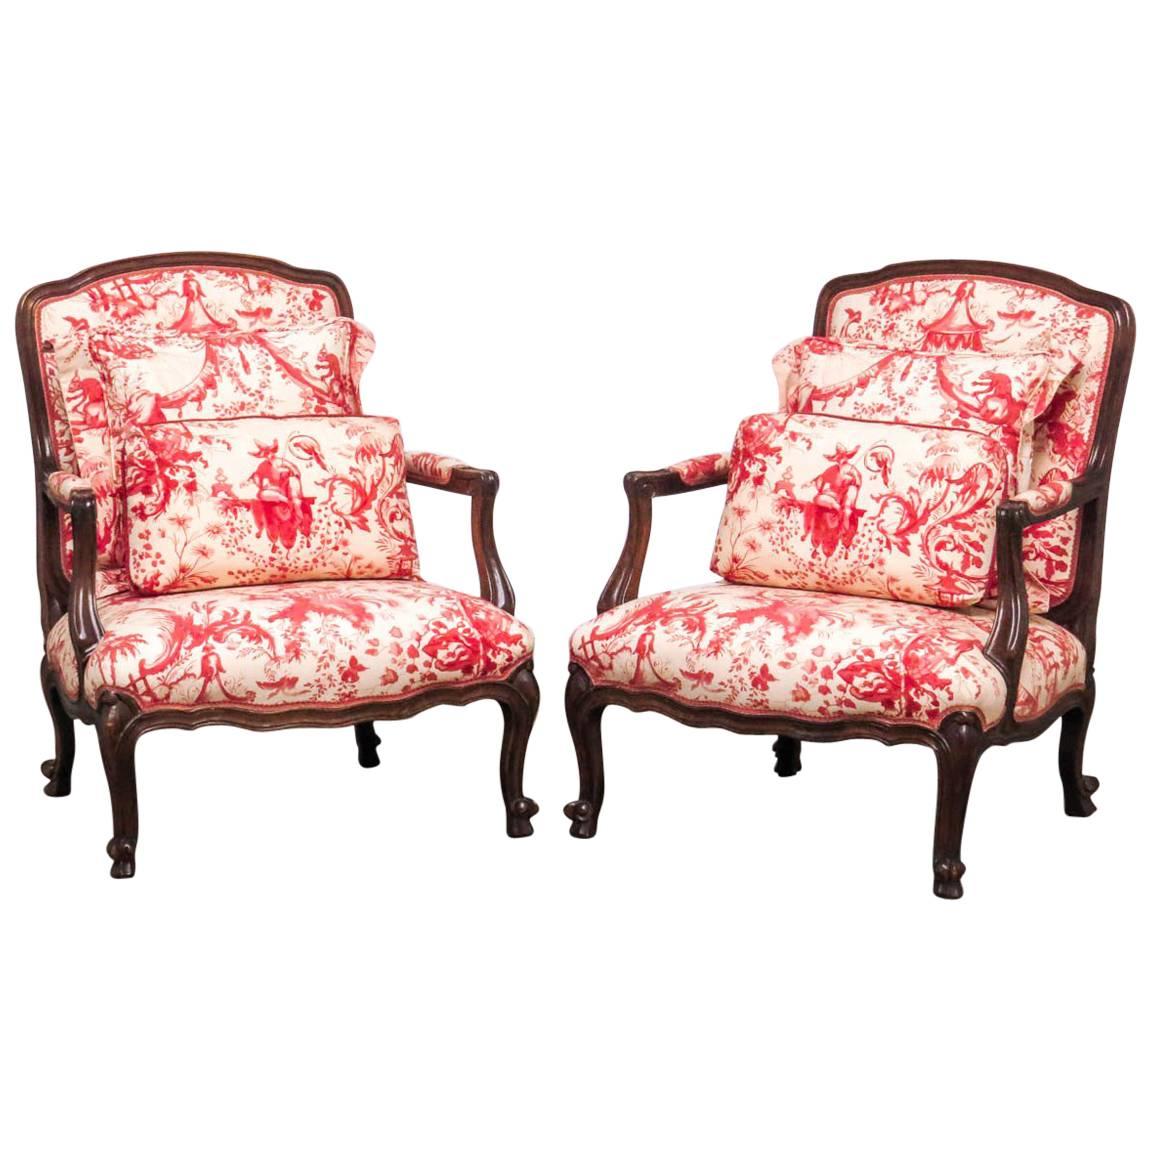 Louis XV Style Fauteuil Armchairs with Scalamandre Chinoiserie Toile